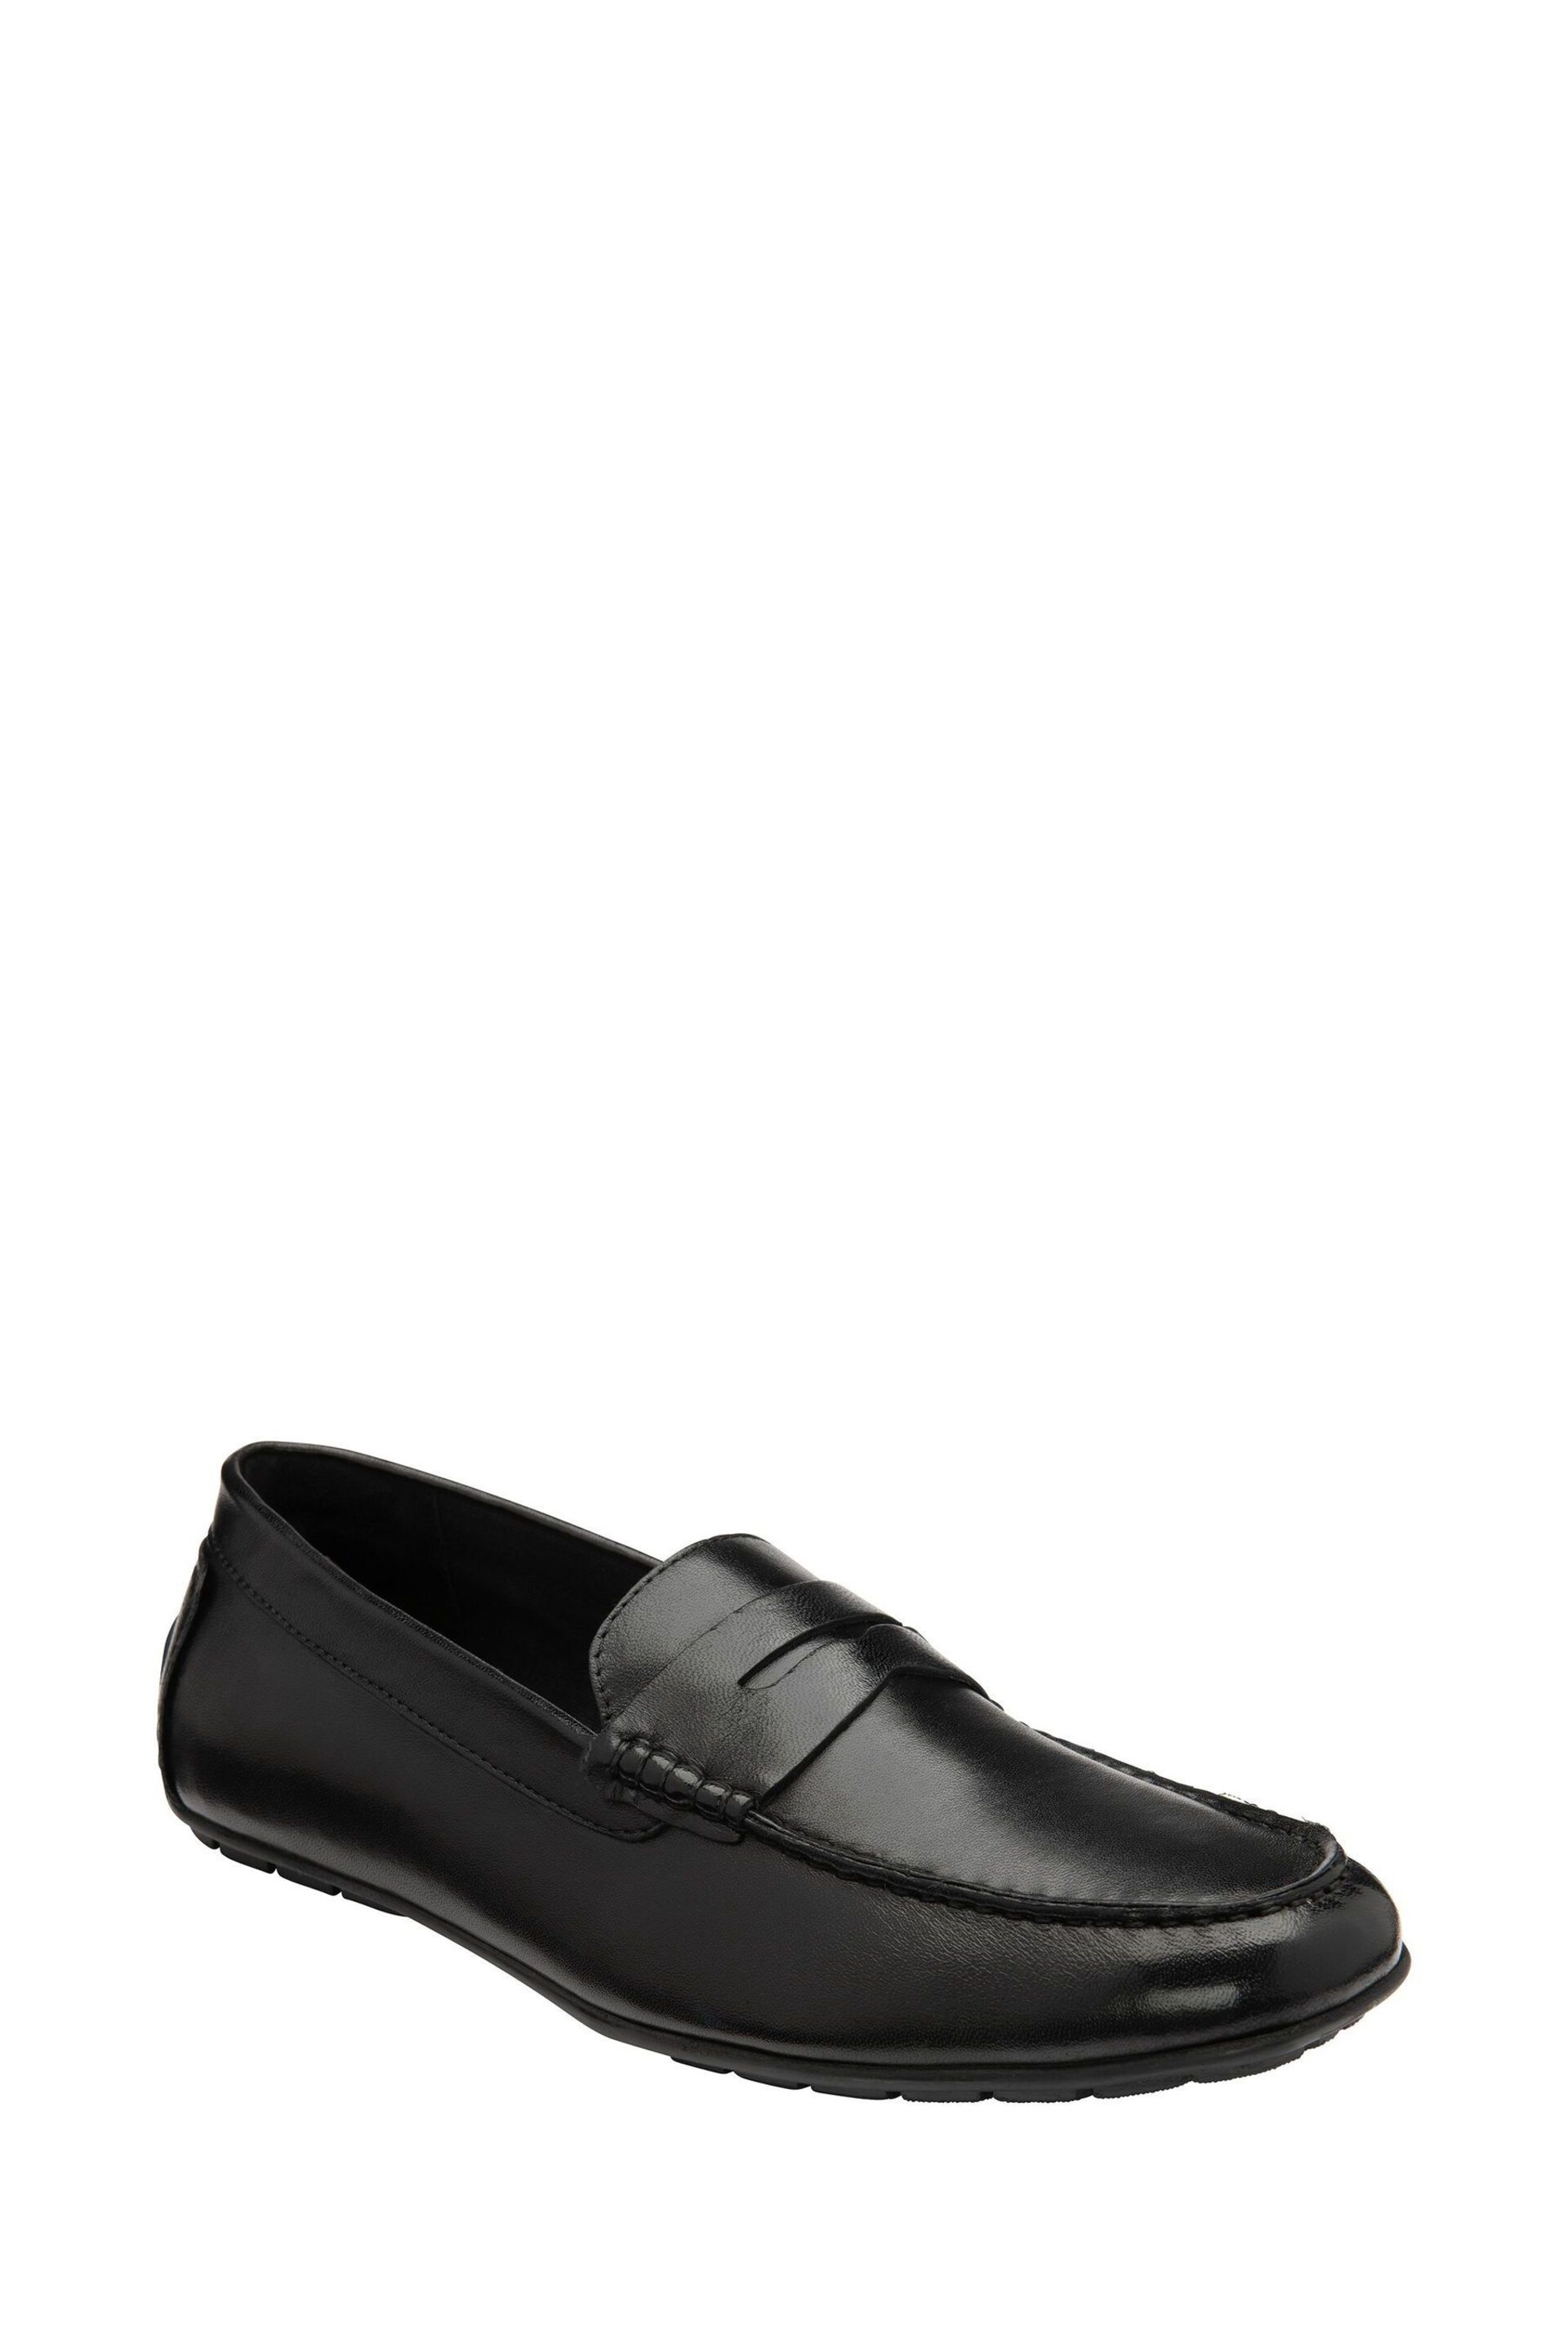 Lotus Black Leather Loafers - Image 1 of 4